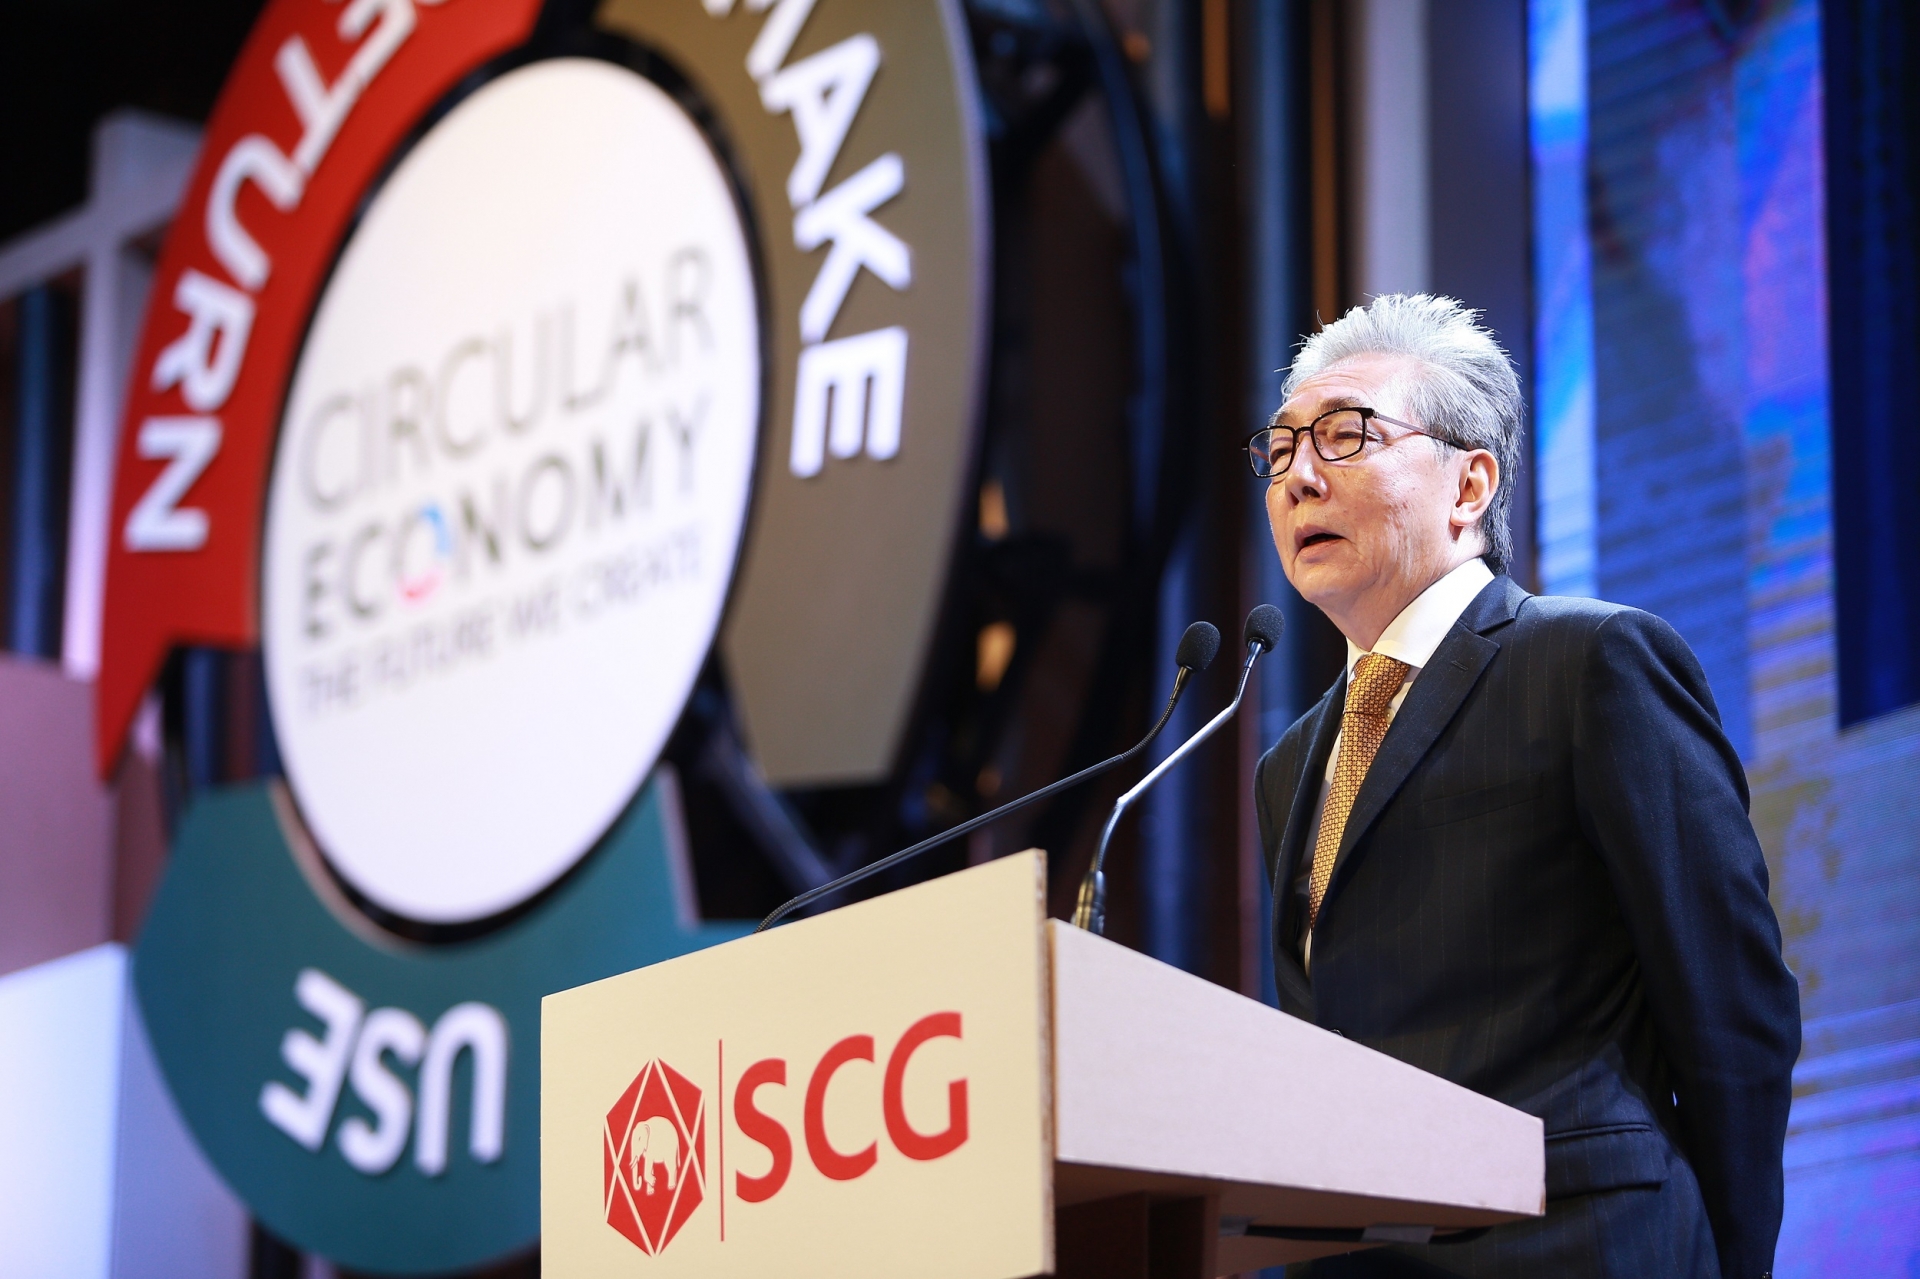 scg heads for circular economy by success stories